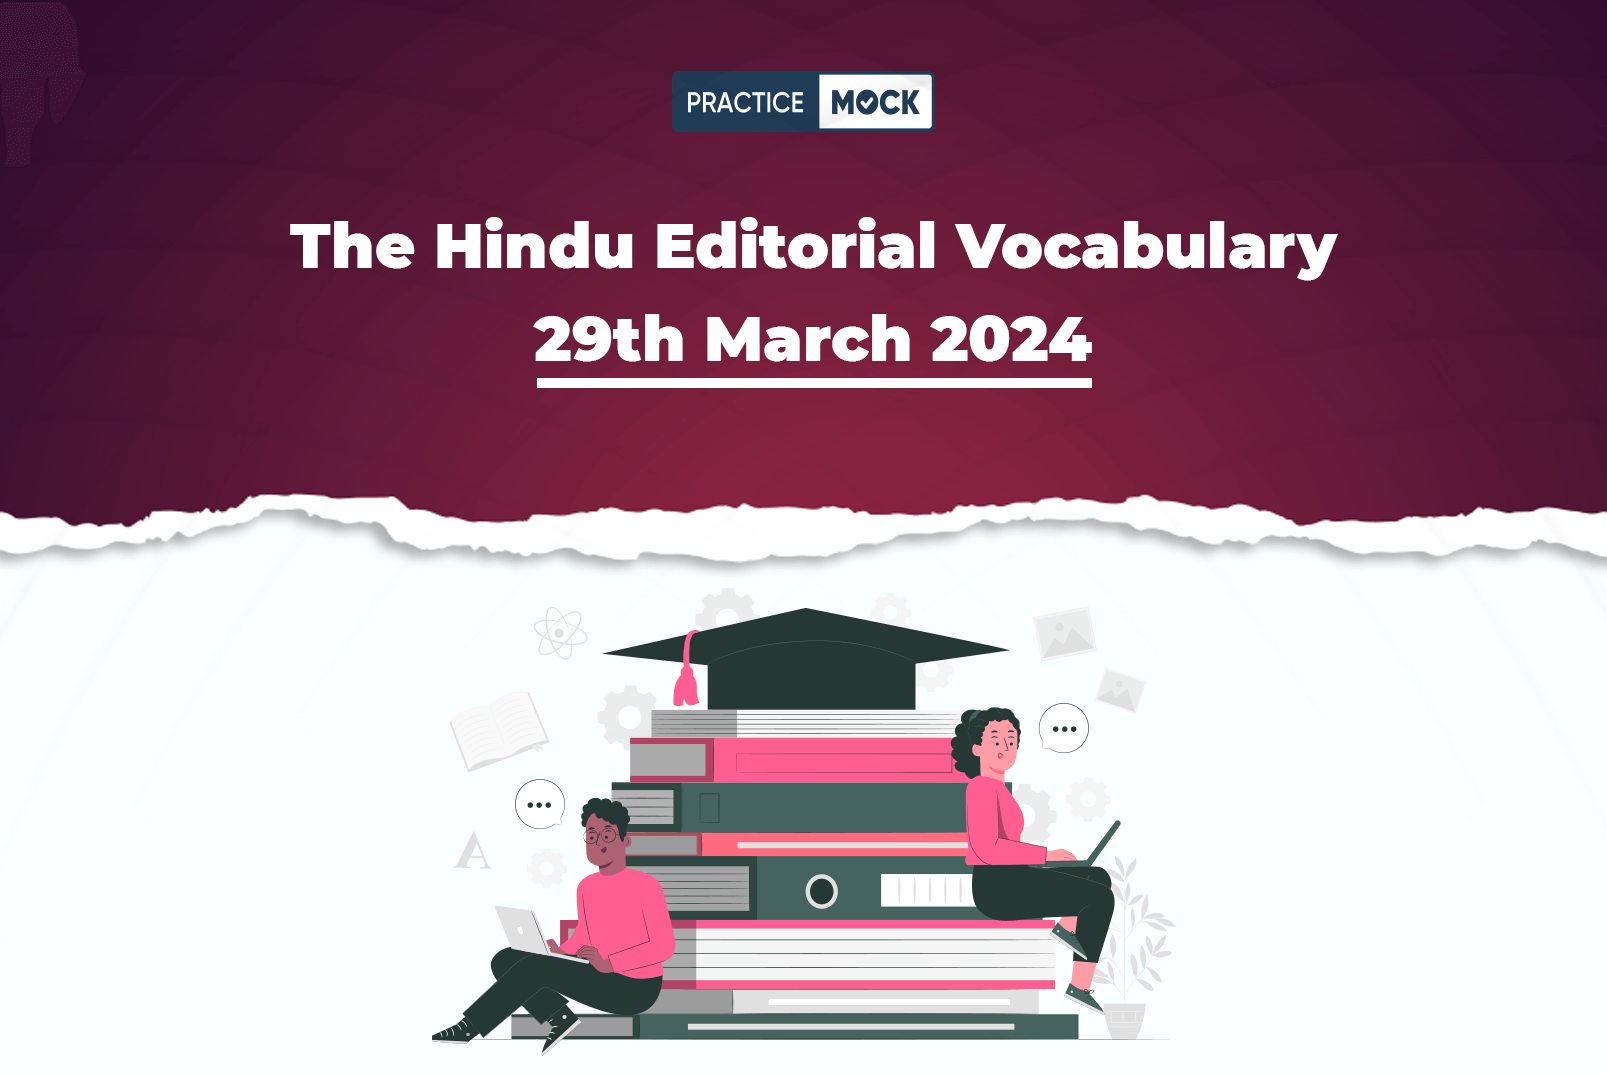 The Hindu Editorial Vocabulary 29th March 2024